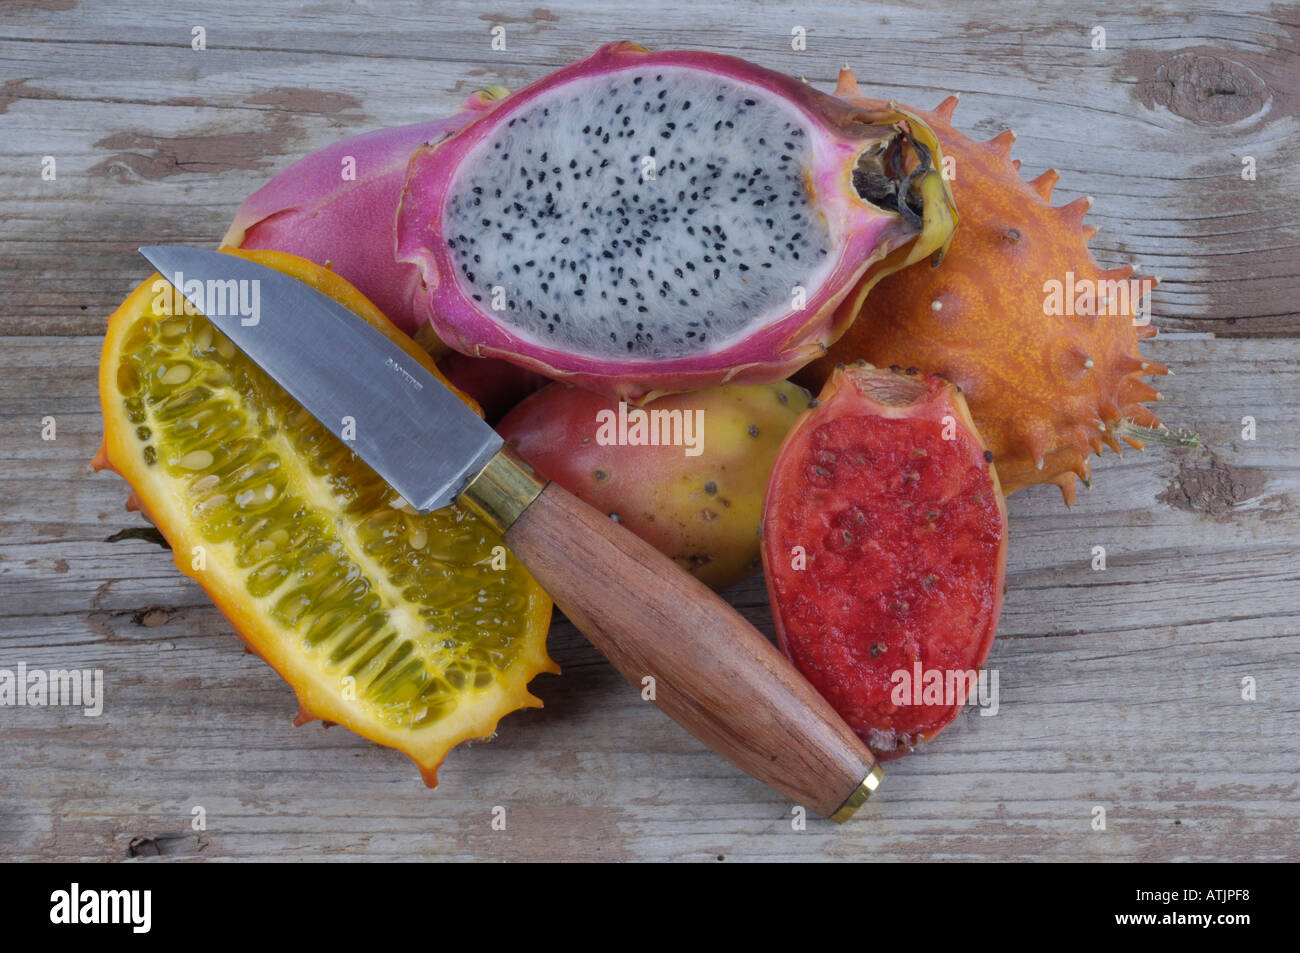 Tropical fruits Stock Photo